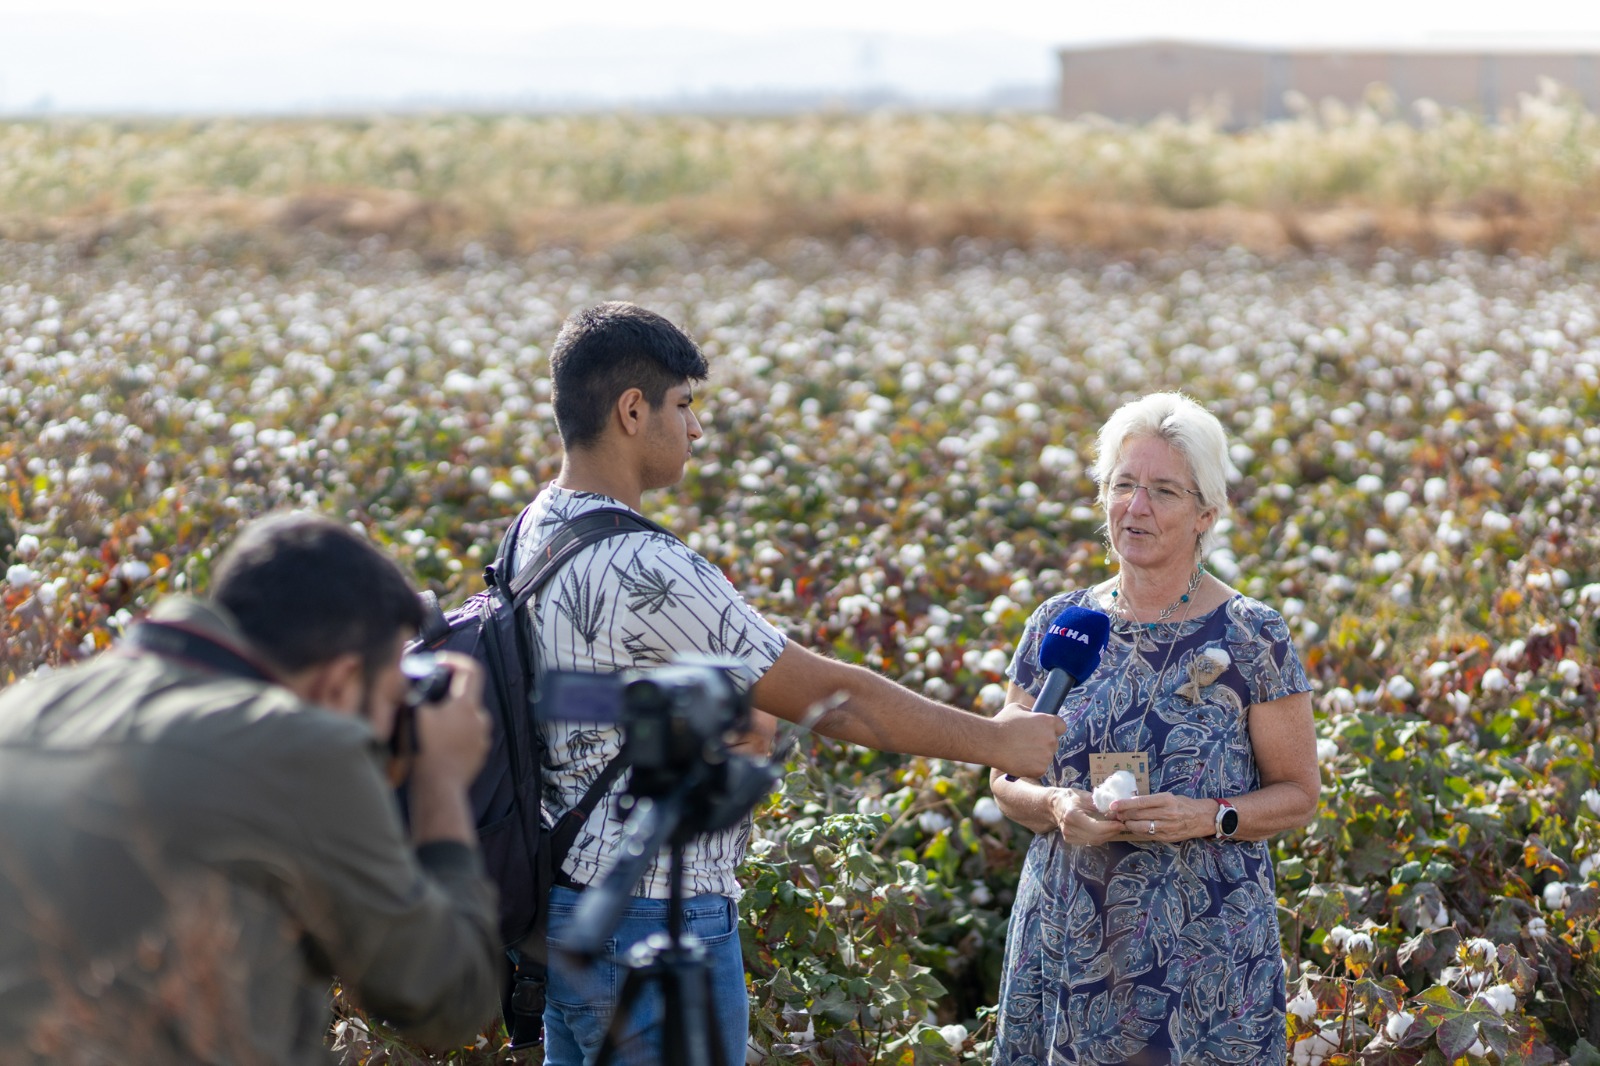 UNDP Türkiye Resident Representative Louisa Vinton standing in front of a cotton field with a reporter pointing a microphone at her and another reporter behind the camera